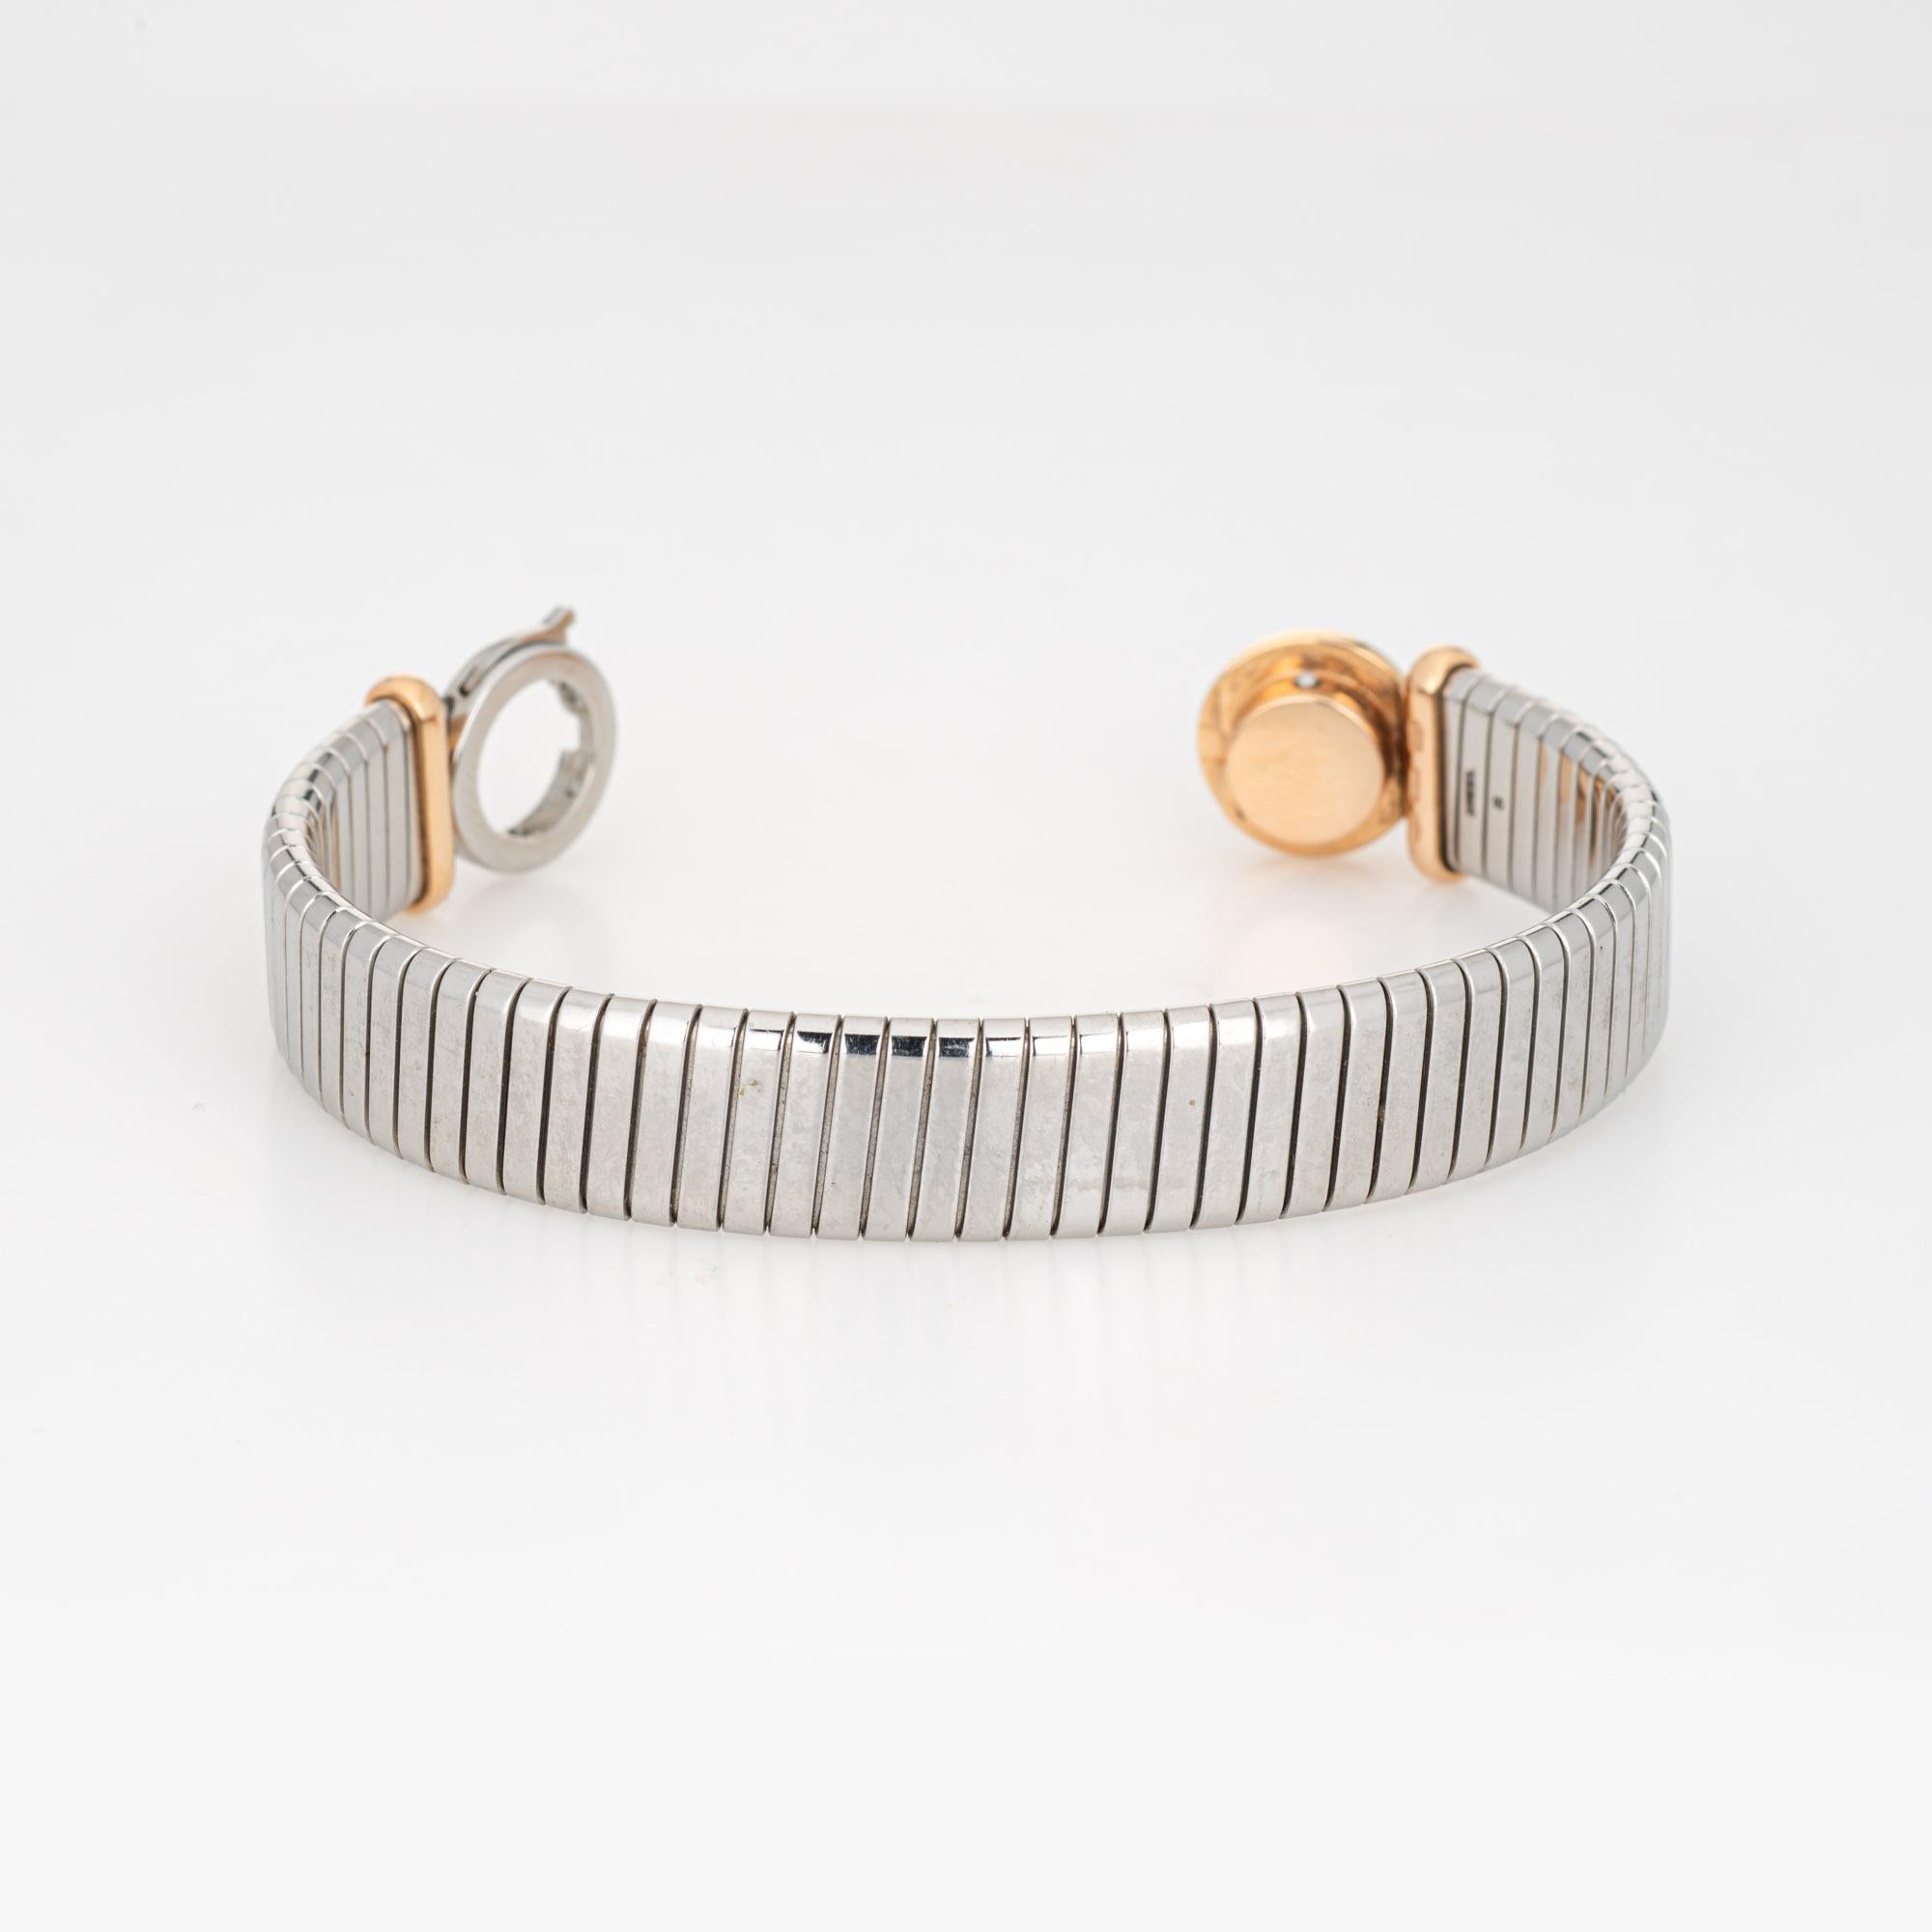 Stylish vintage Bulgari 'Tubogas' bracelet crafted in 18k yellow gold and stainless steel (circa 1990s).  

The bracelet is designed to resemble a flexible gas pipe, finished with an onyx set 18k gold end. The Tubogas design requires a great amount